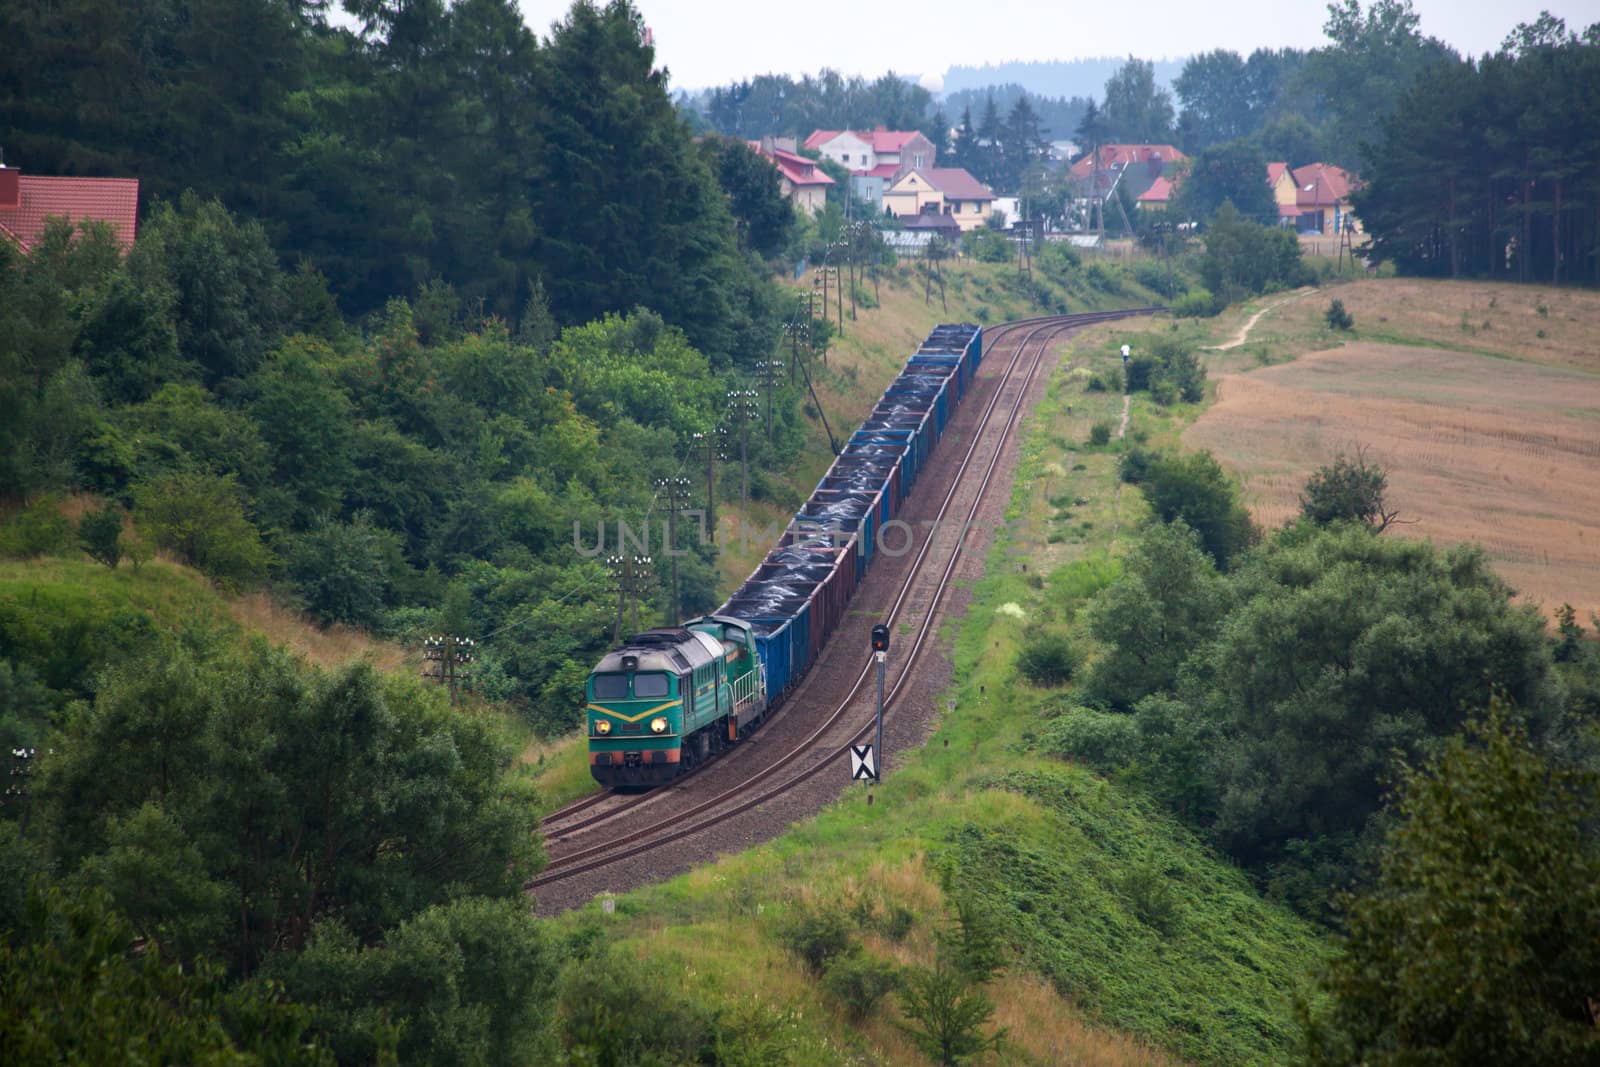 Freight train hauled by the diesel locomotives passing the forest
